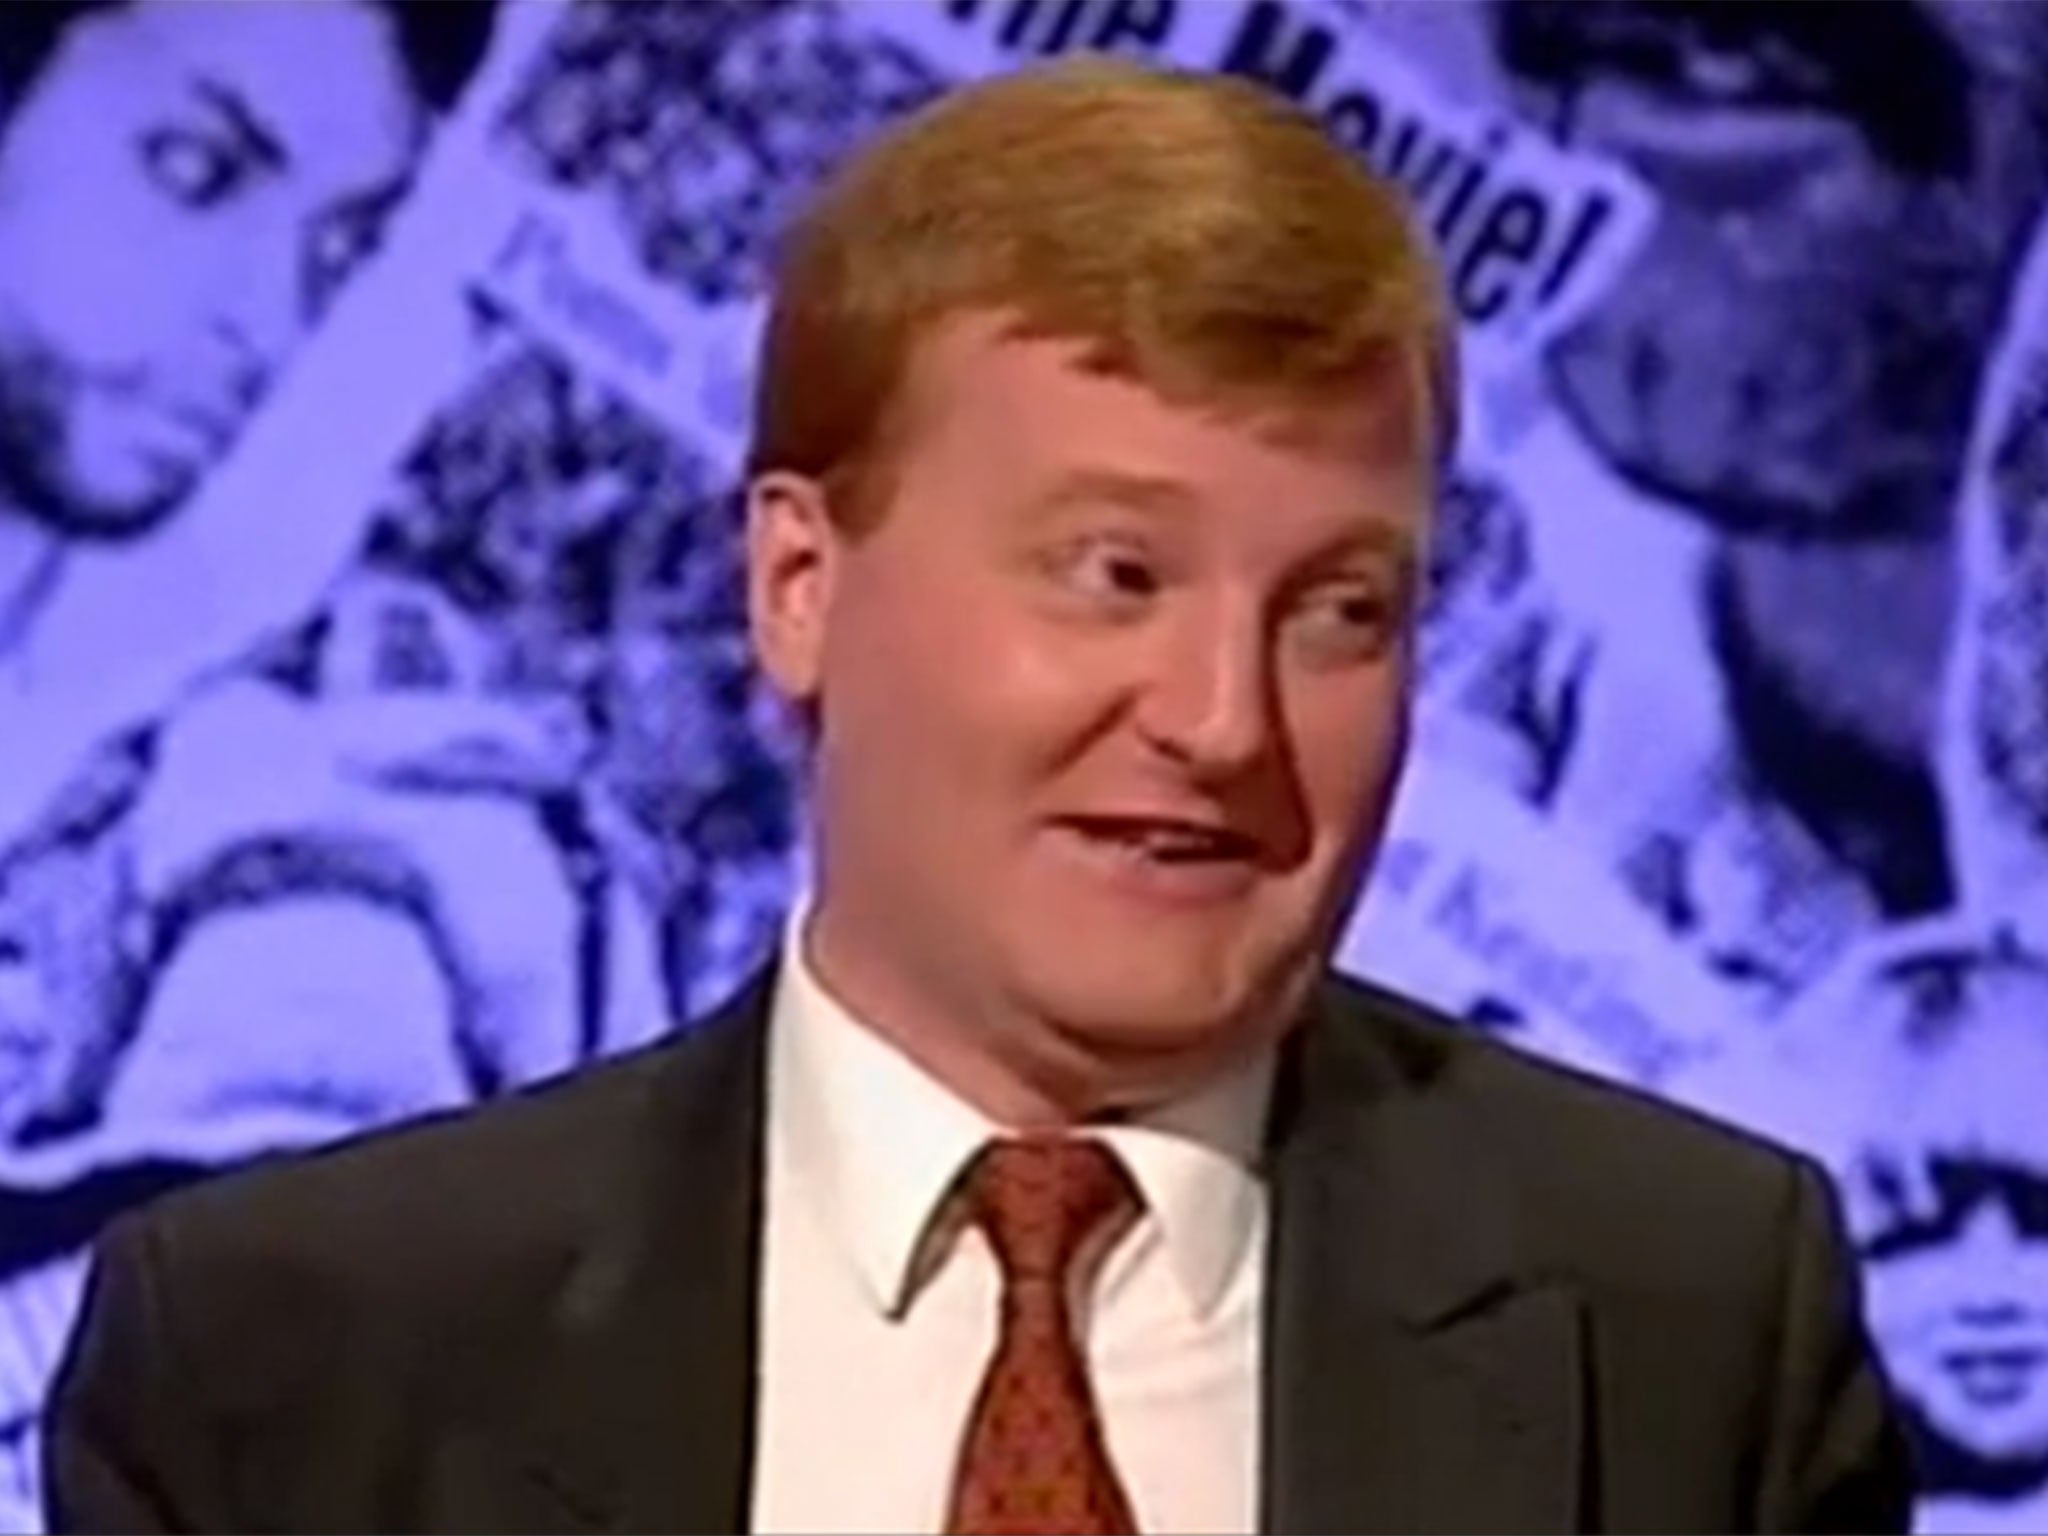 Have I Got News for You has paid tribute to sometime panelist Charles Kennedy